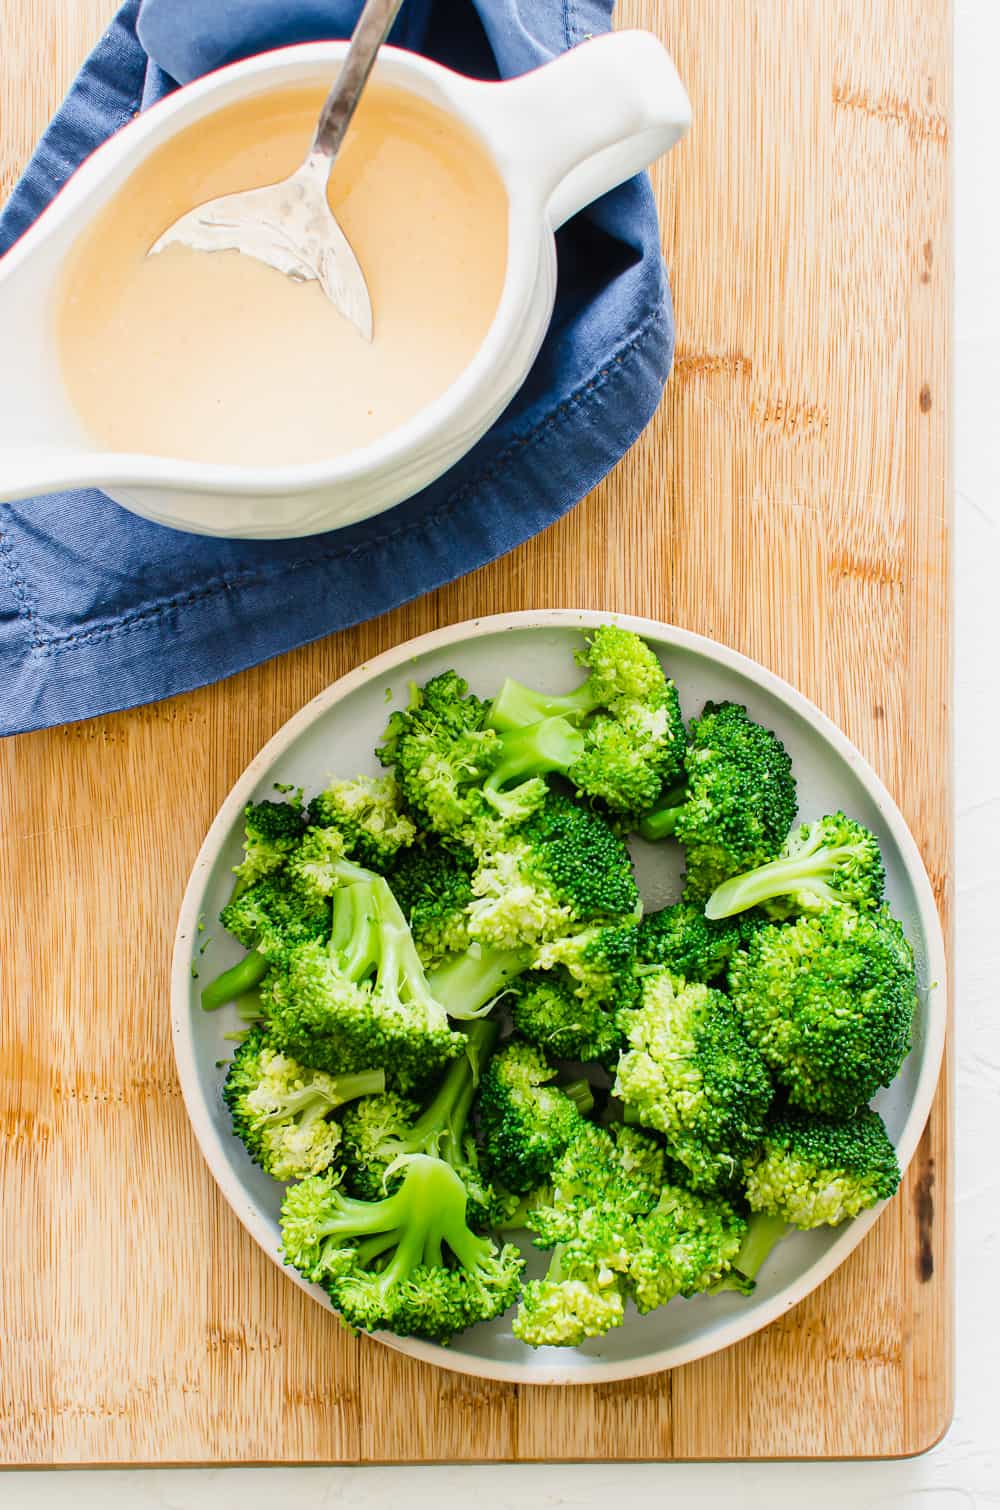 Homemade cheese sauce in a white serving bowl next to a plate of steamed broccoli on a wooden cutting board.